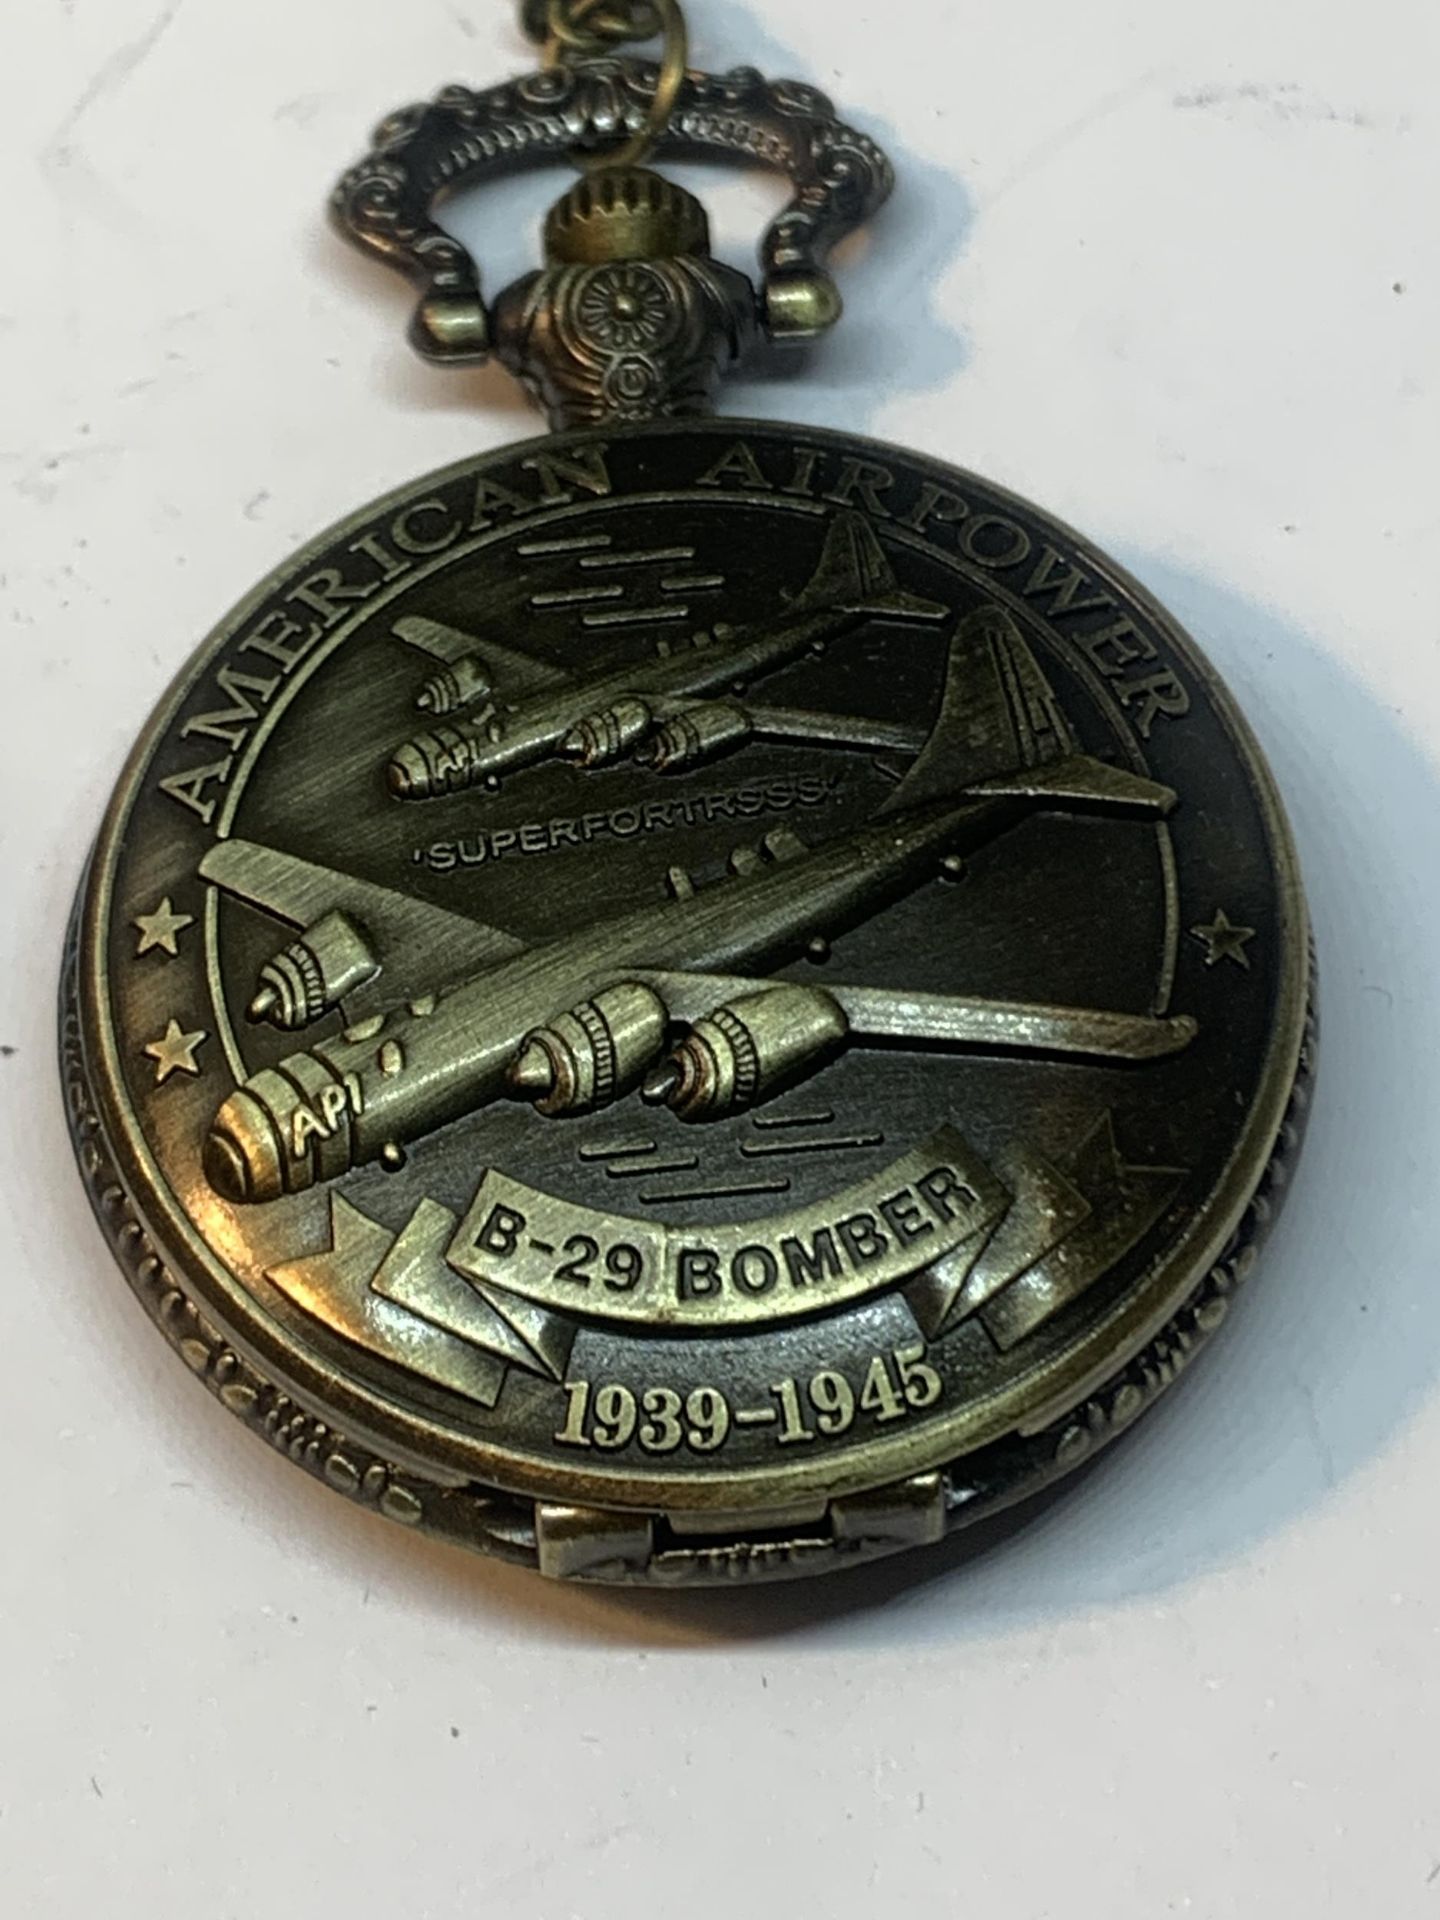 TWO POCKET WATCHES WITH IMAGES OF USA BOMBER AND A COAT OF ARMS - Image 3 of 5